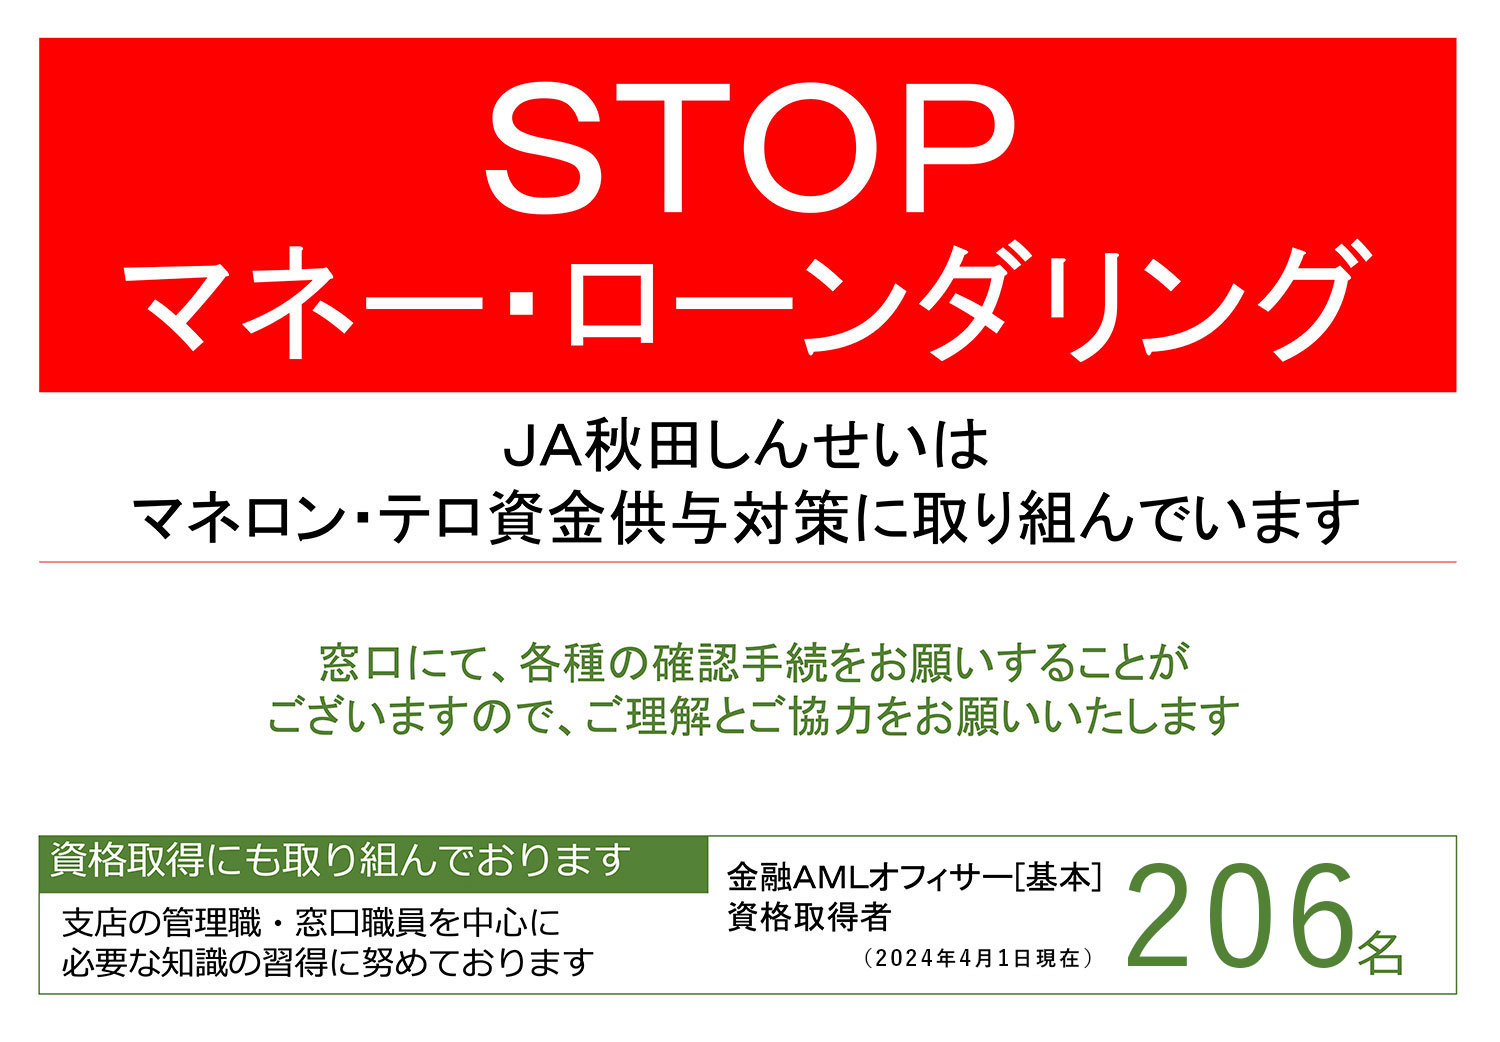 STOP マネー・ローンダリング